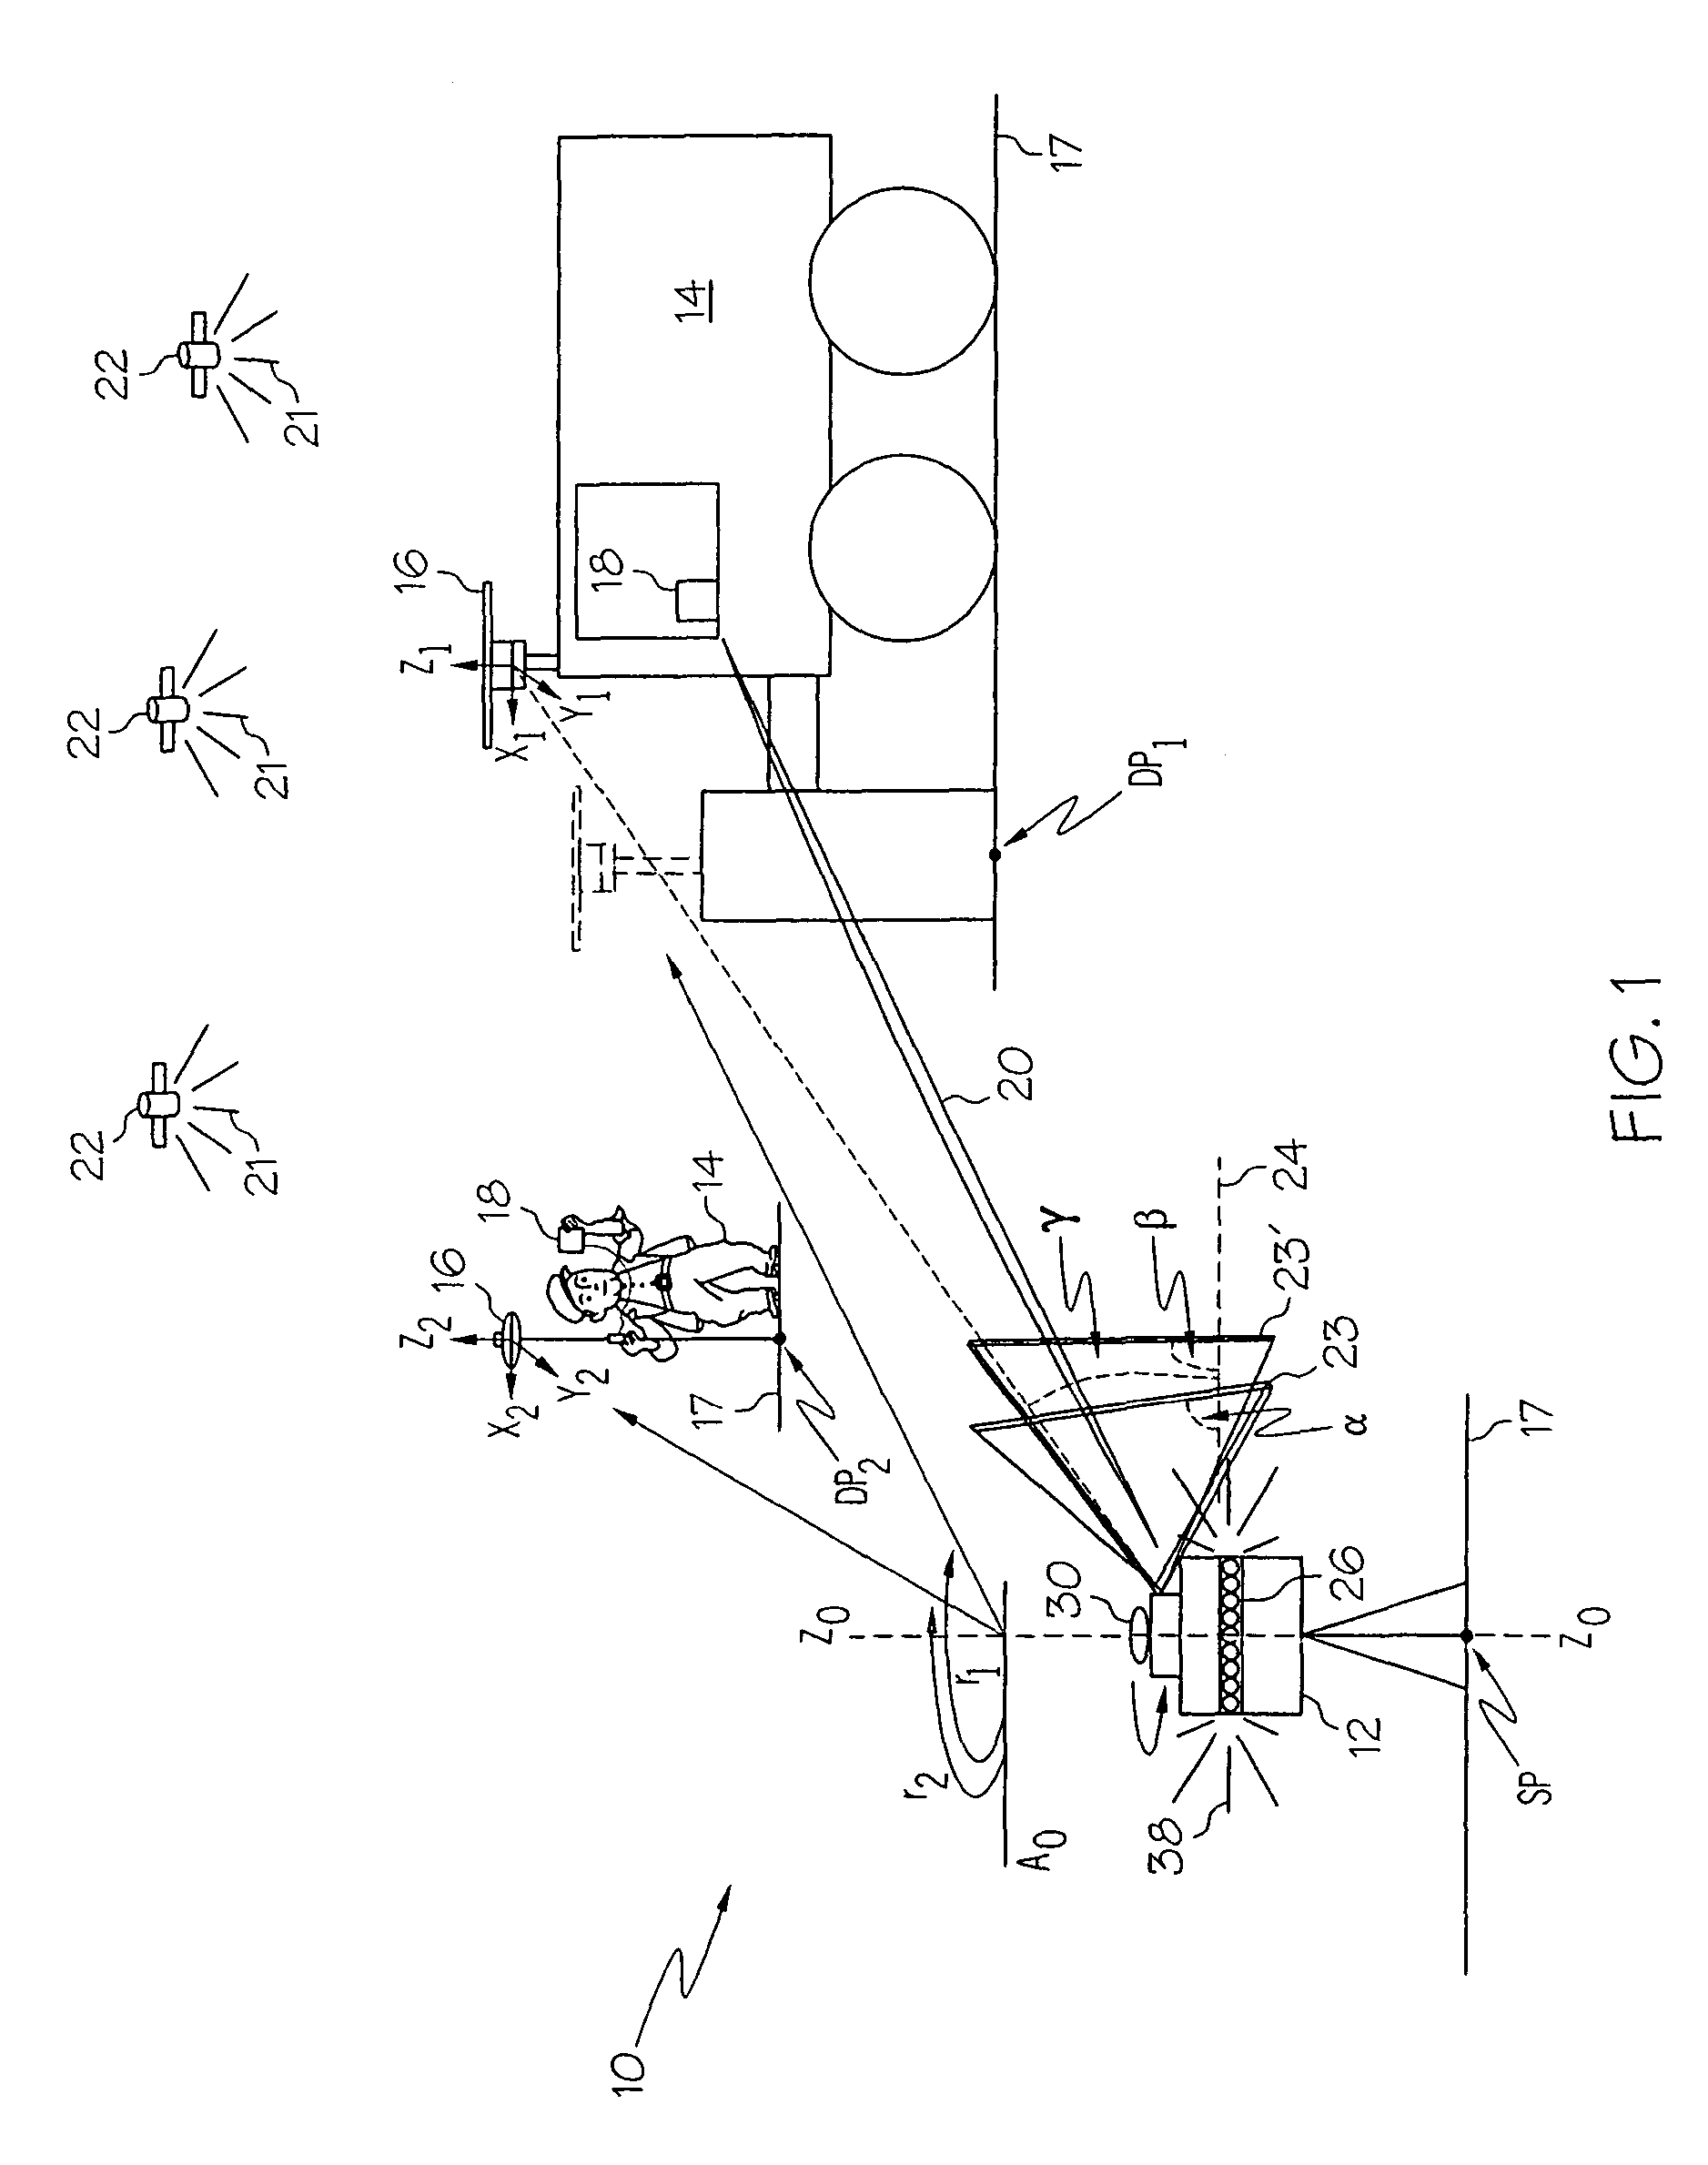 Navigation system using both GPS and laser reference